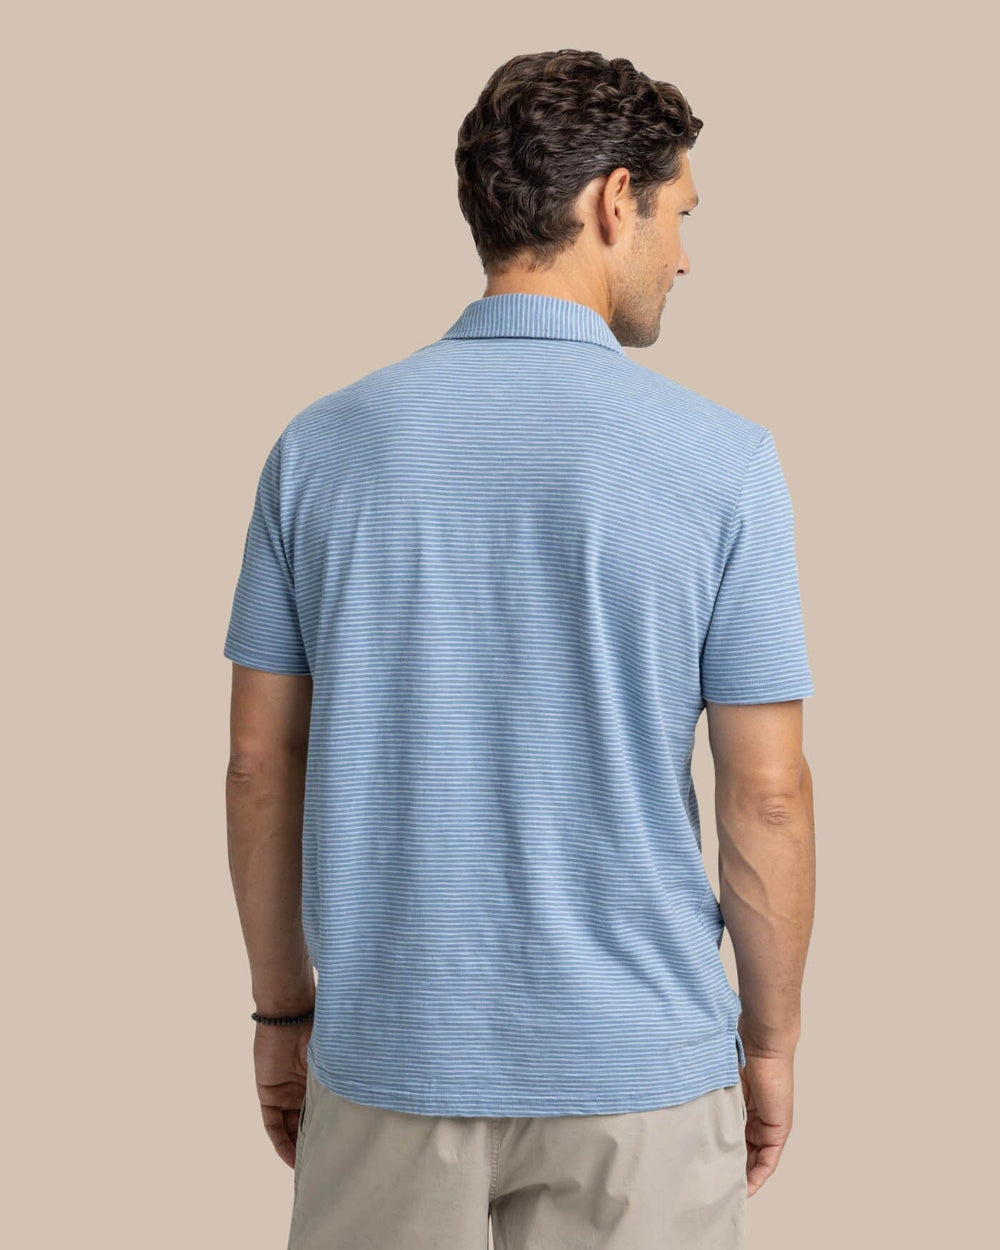 The back view of the Southern Tide Sun Farer Summertree Stripe Polo by Southern Tide - Coronet Blue